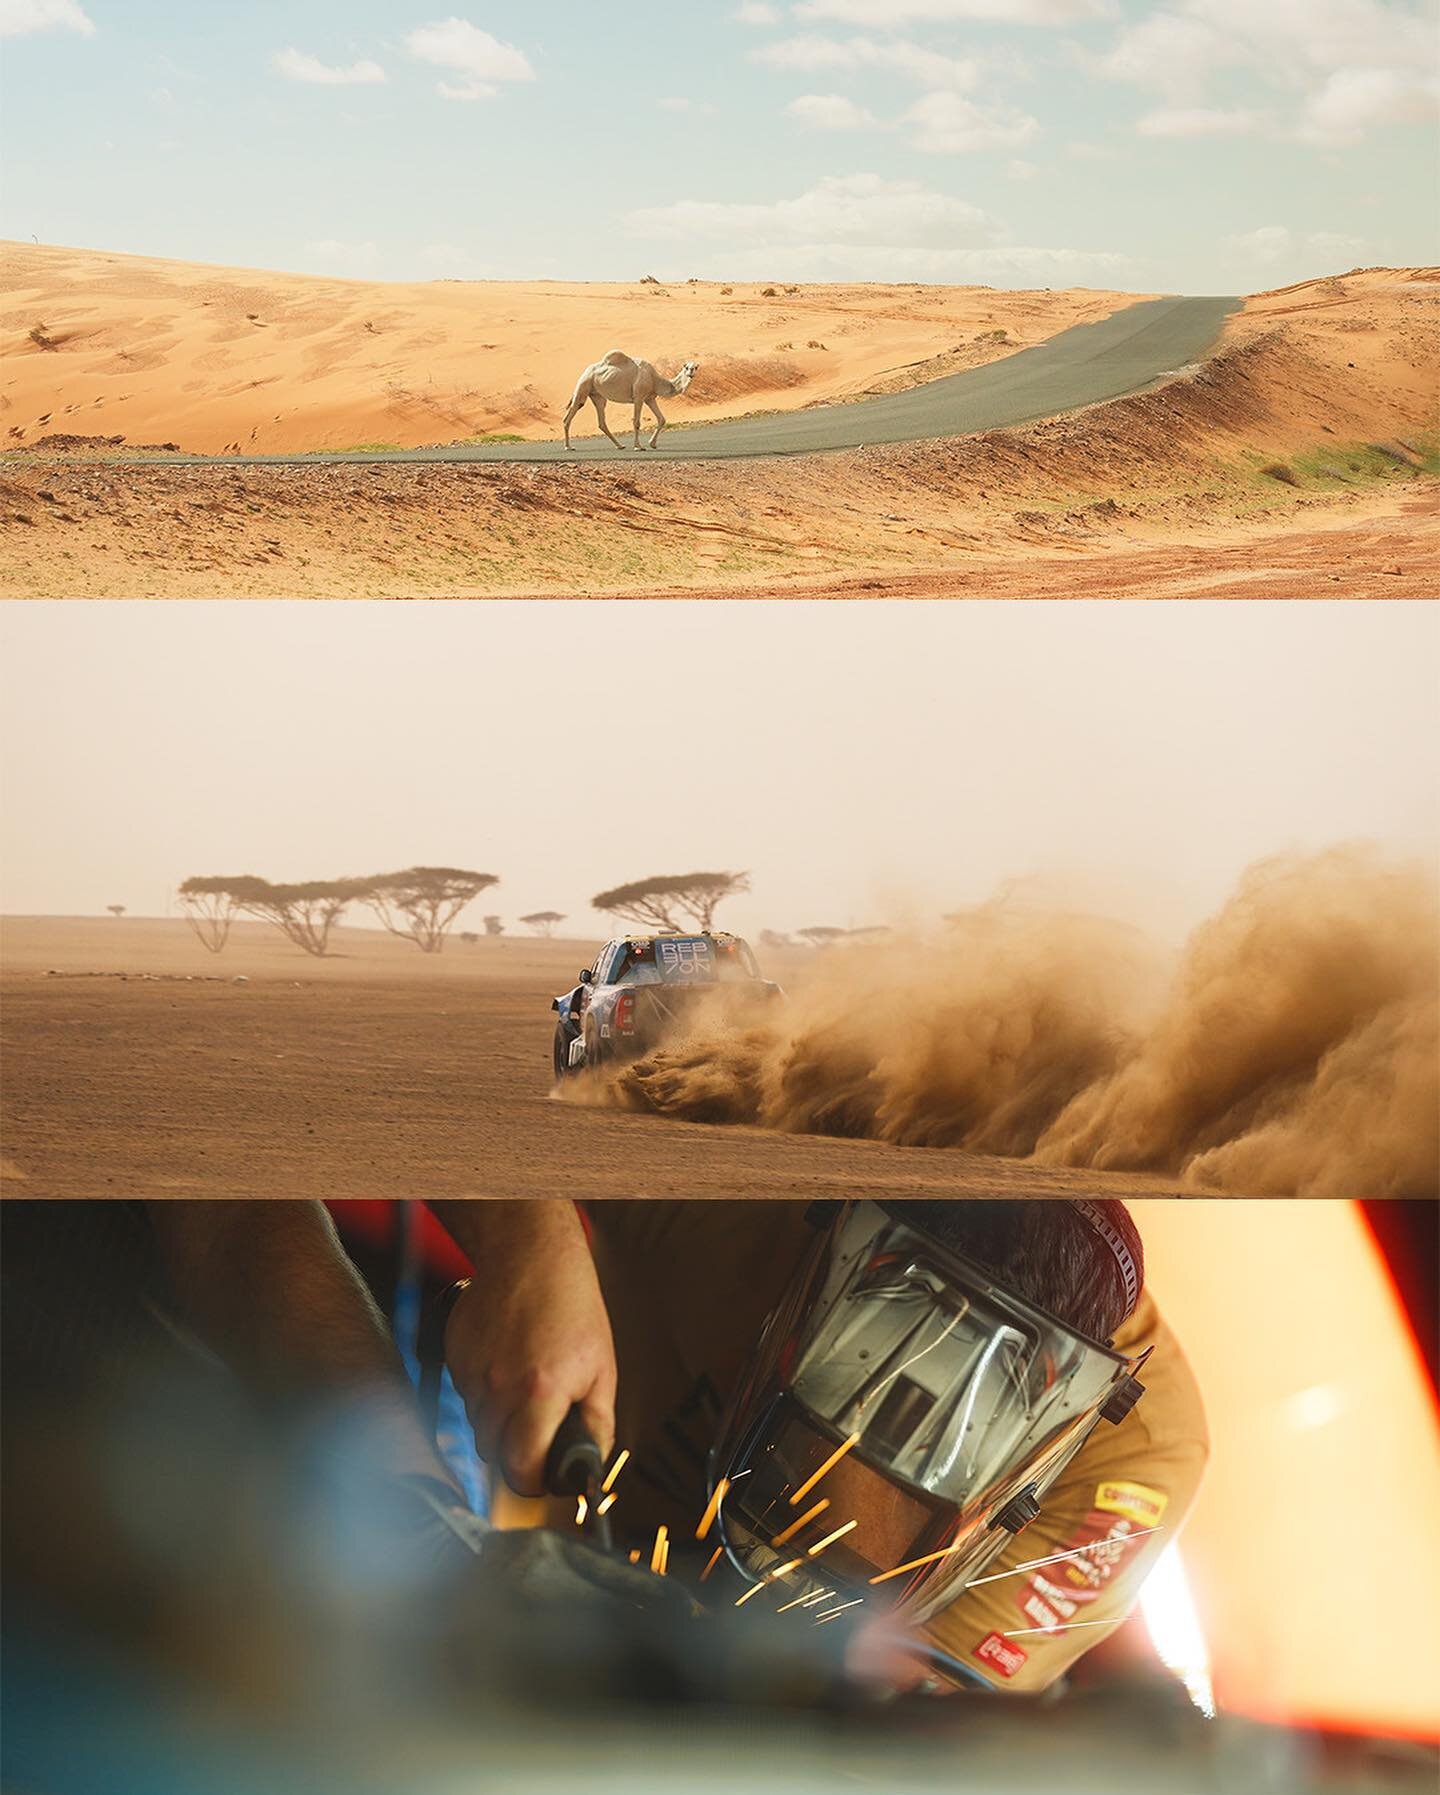 The WABS team was fortunate to delve into the heart-pumping action of the 2023 Dakar Rally in Saudi Arabia's sand dunes. 🇸🇦 ⁣
⁣
Our journey to bring the audience an immersive experience was made possible thanks to @lagencedare. We worked for them i